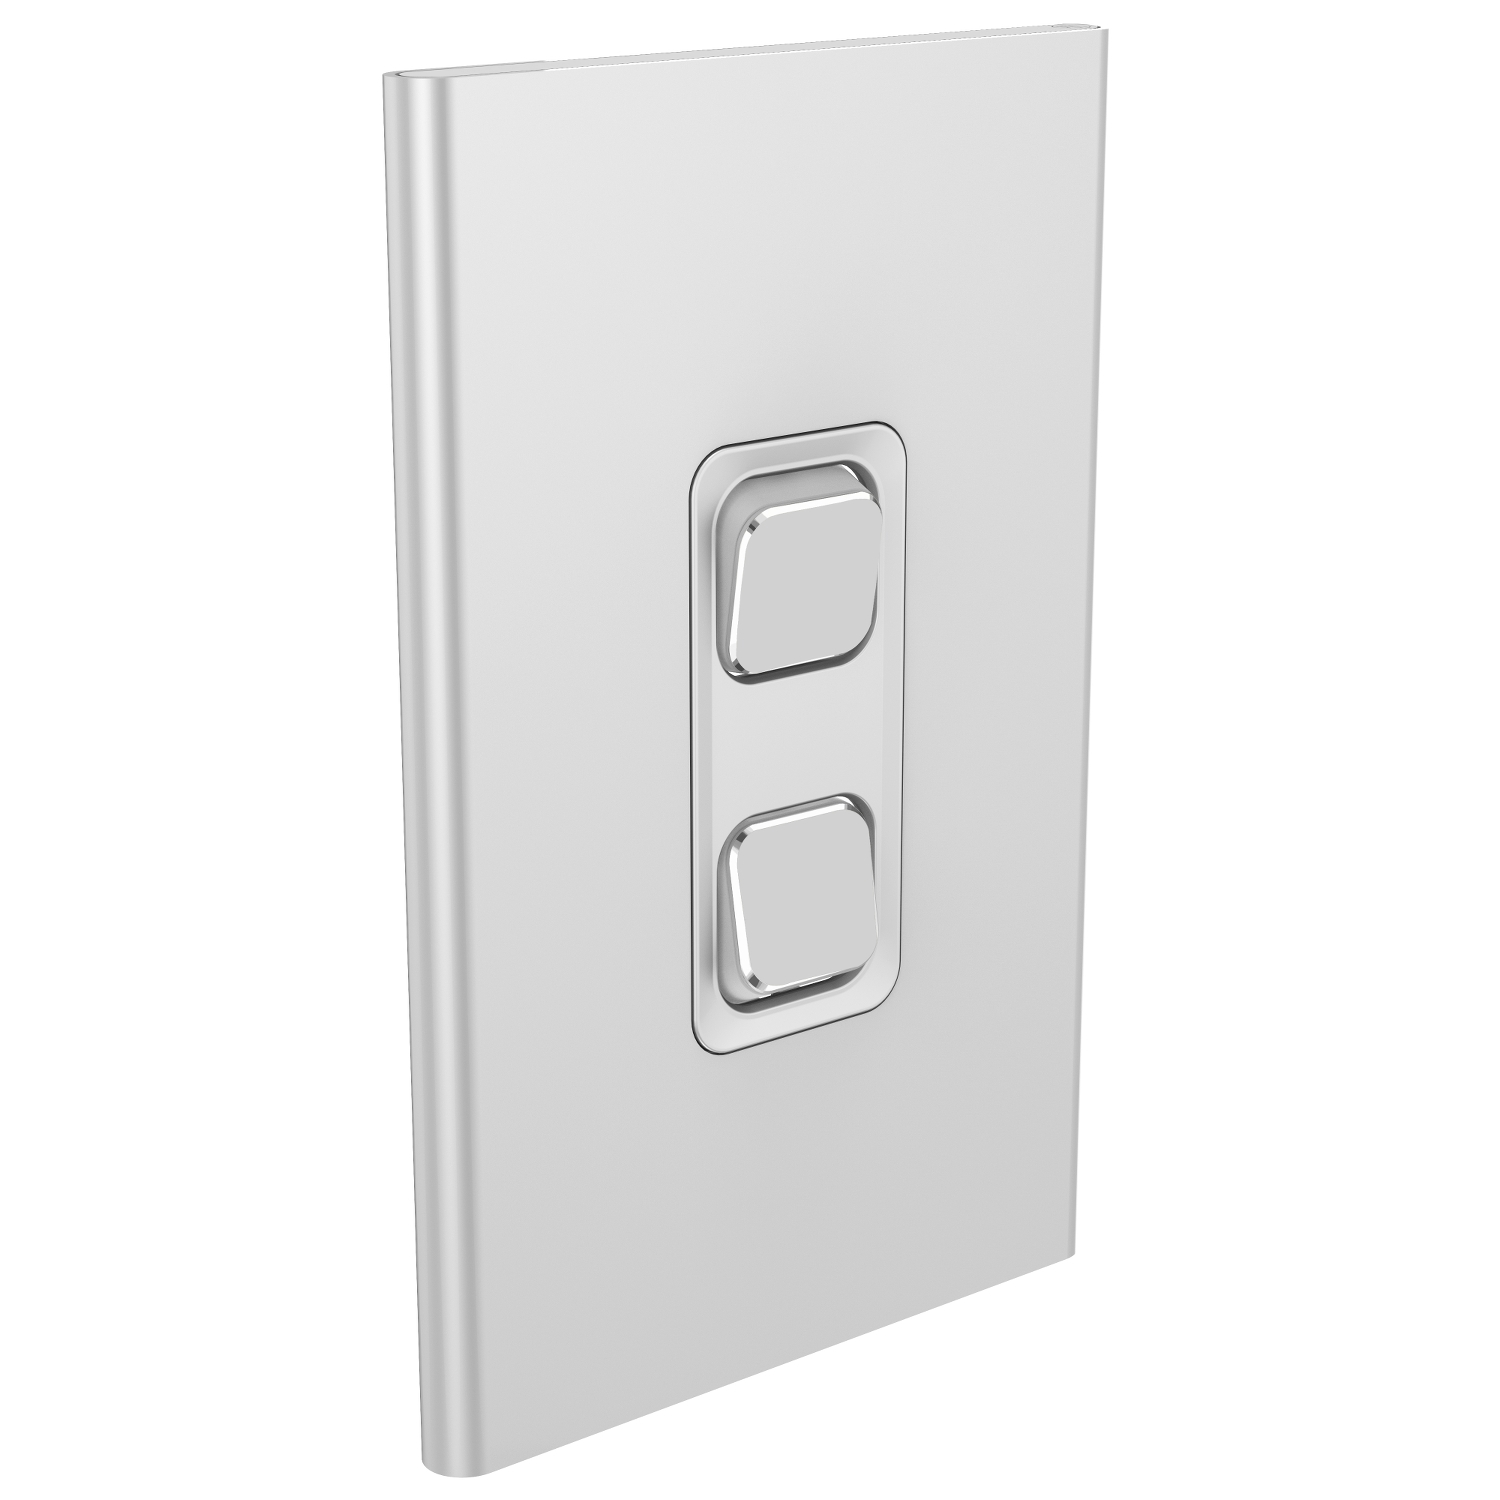 PDL Iconic Styl, cover frame, 2 switches, vertical - Silver